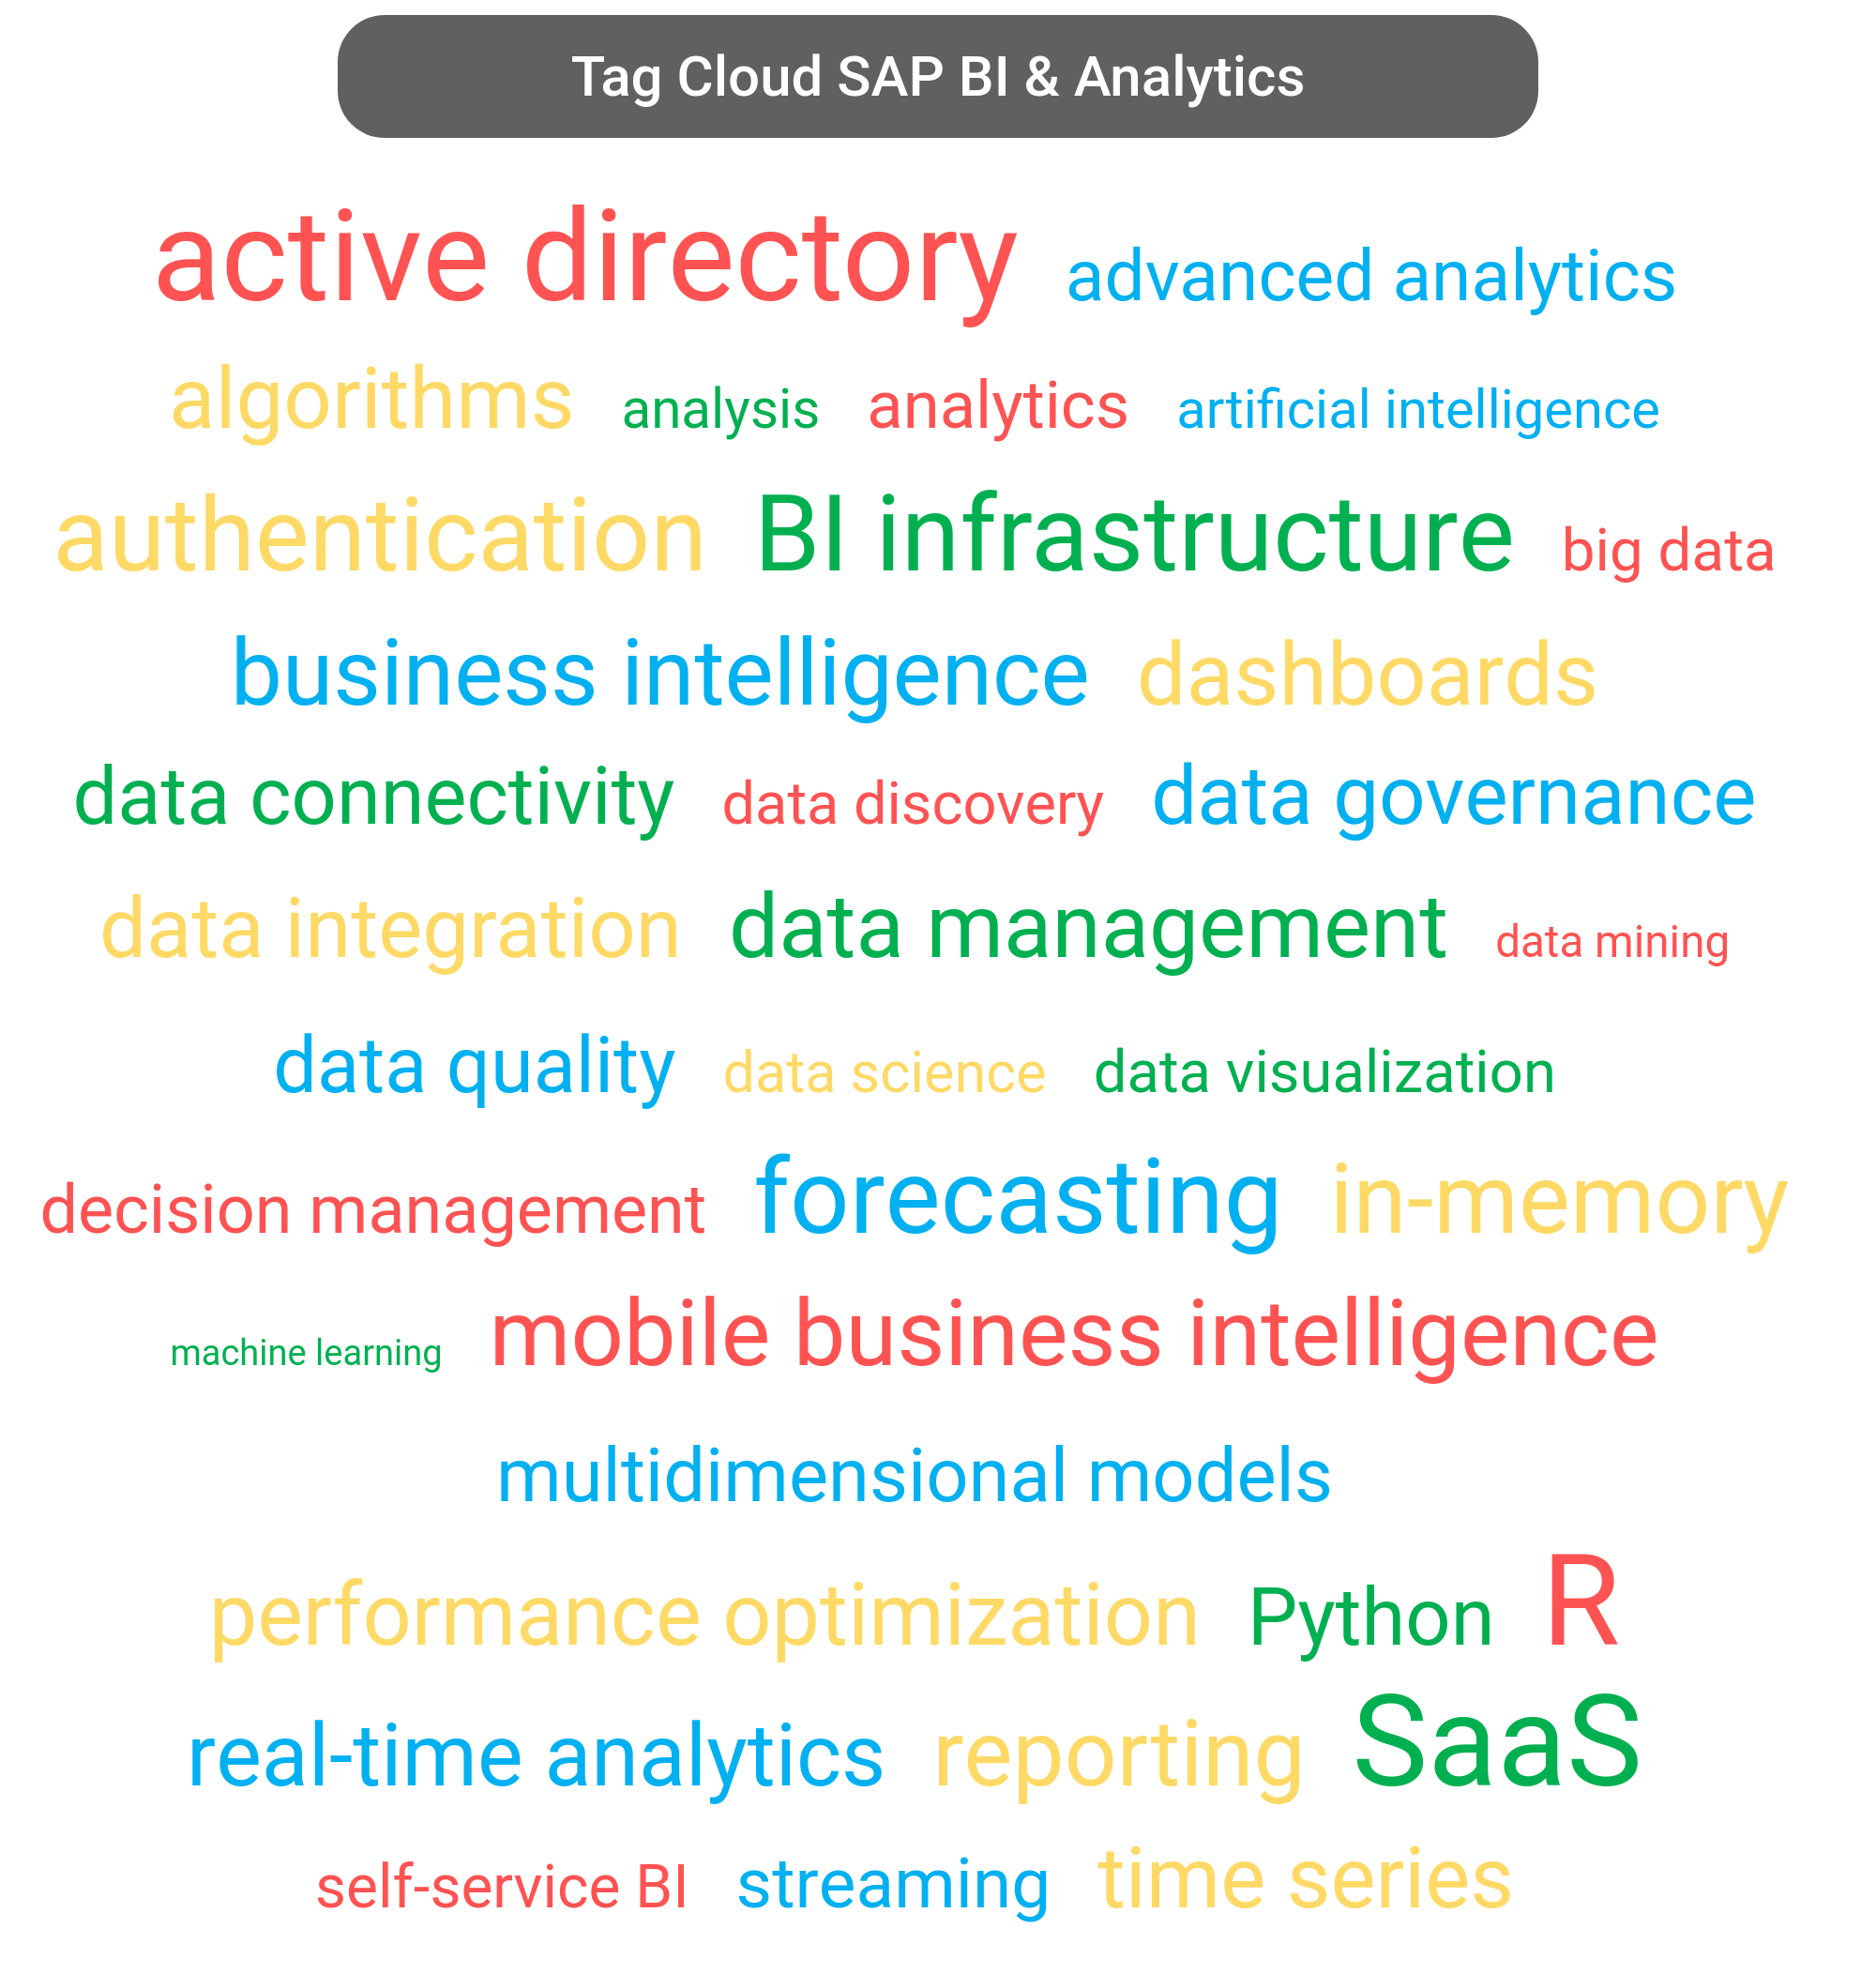 Tag cloud of the SAP Analytics tools.